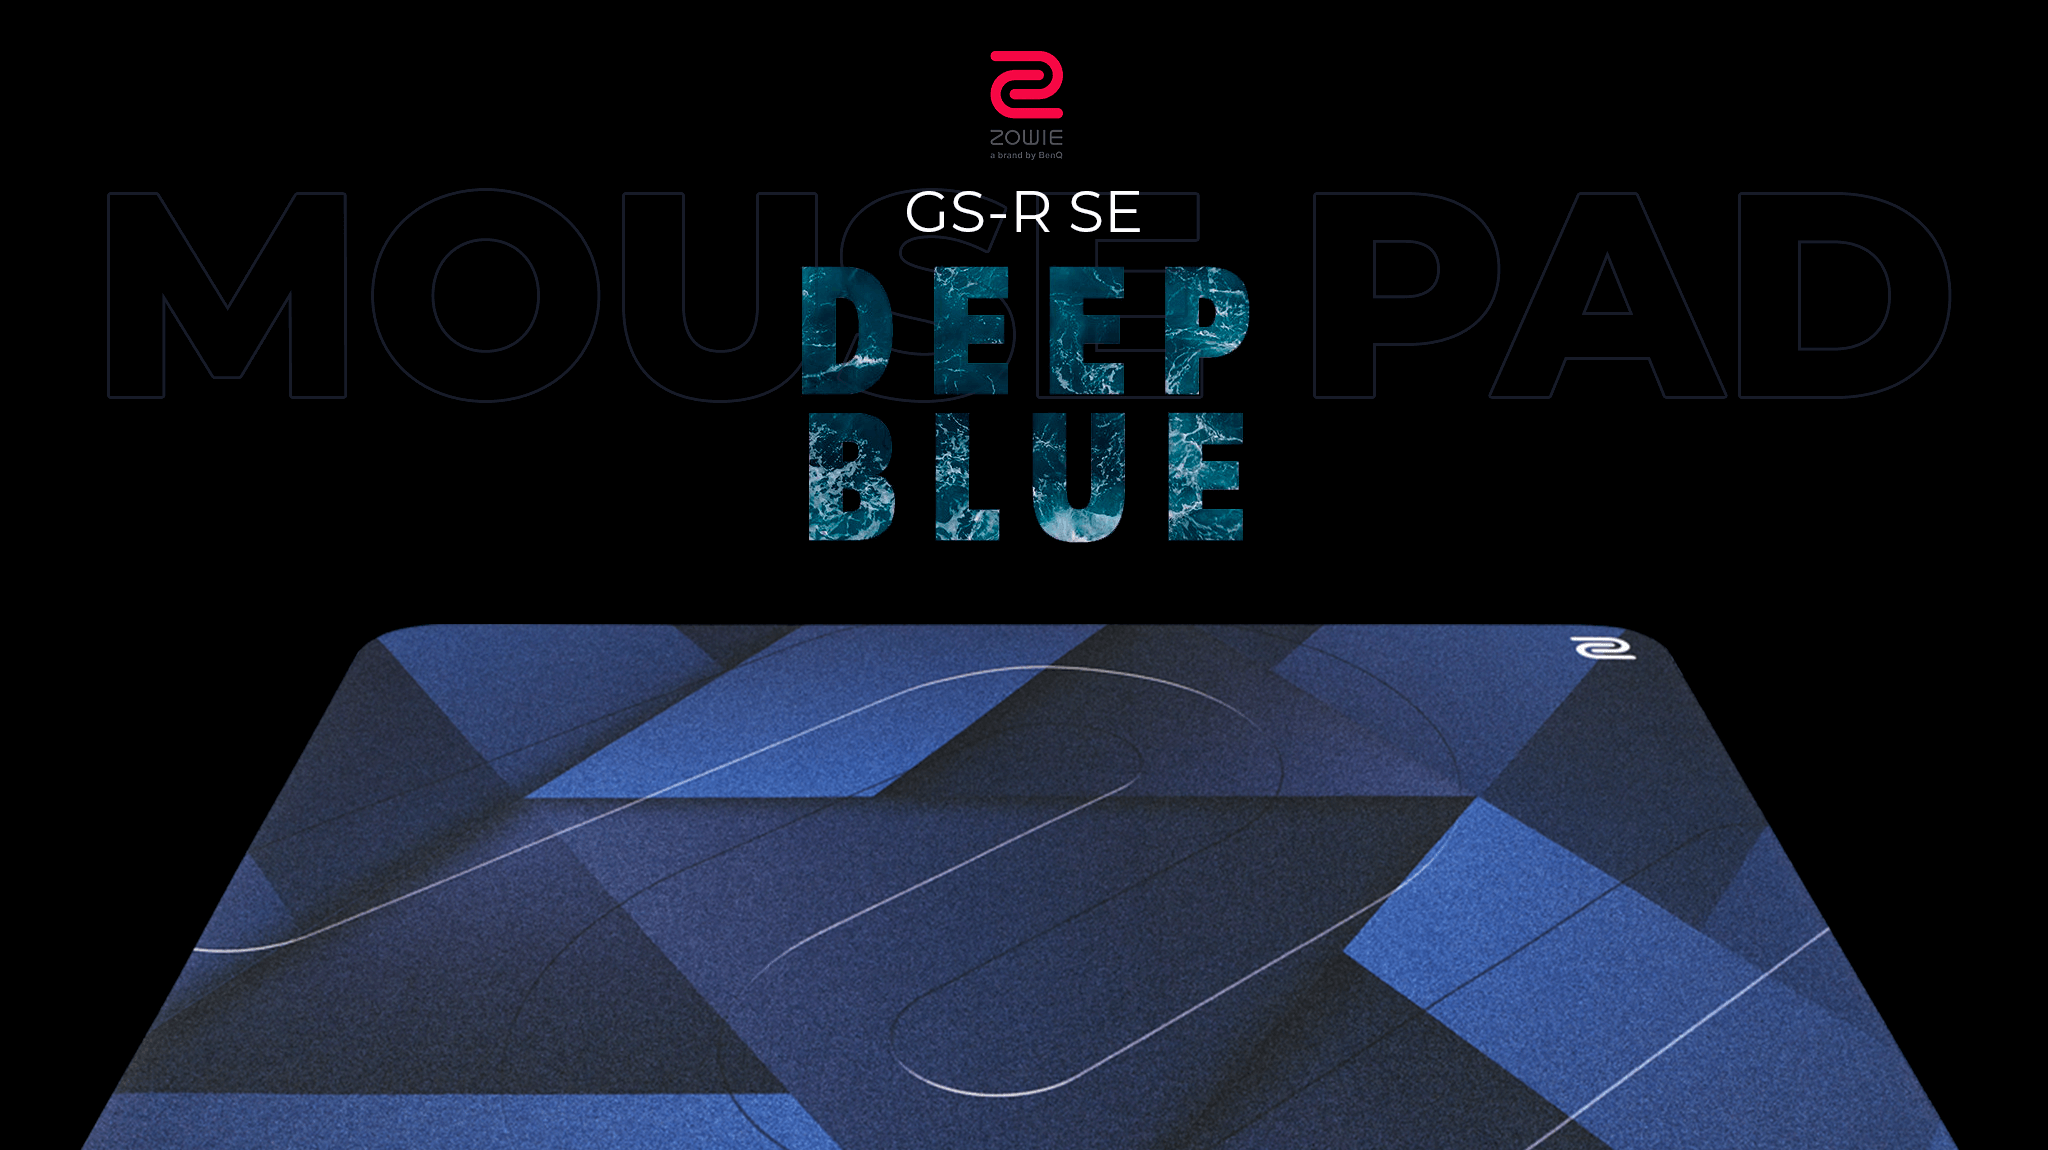 Zowie E Sports North America We Have Restocked The G Sr Se Deep Blue The Smooth And Even Texture Offers A Consistent Glide Throughout Order Here T Co Arsnvluplp T Co O6vhzlzeti Twitter